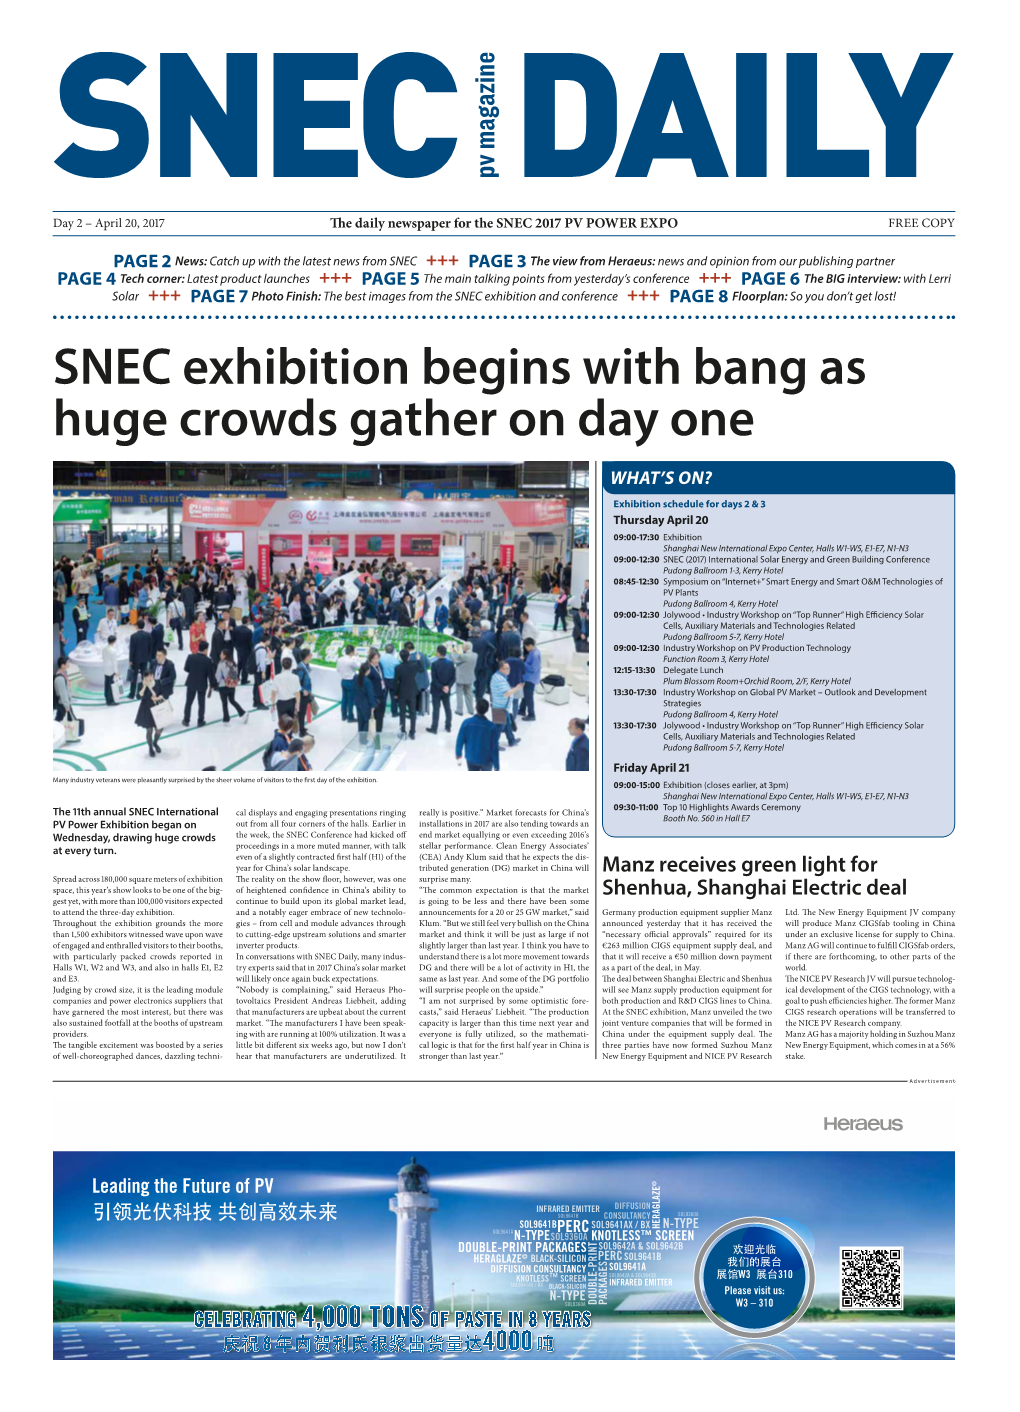 SNEC Exhibition Begins with Bang As Huge Crowds Gather on Day One